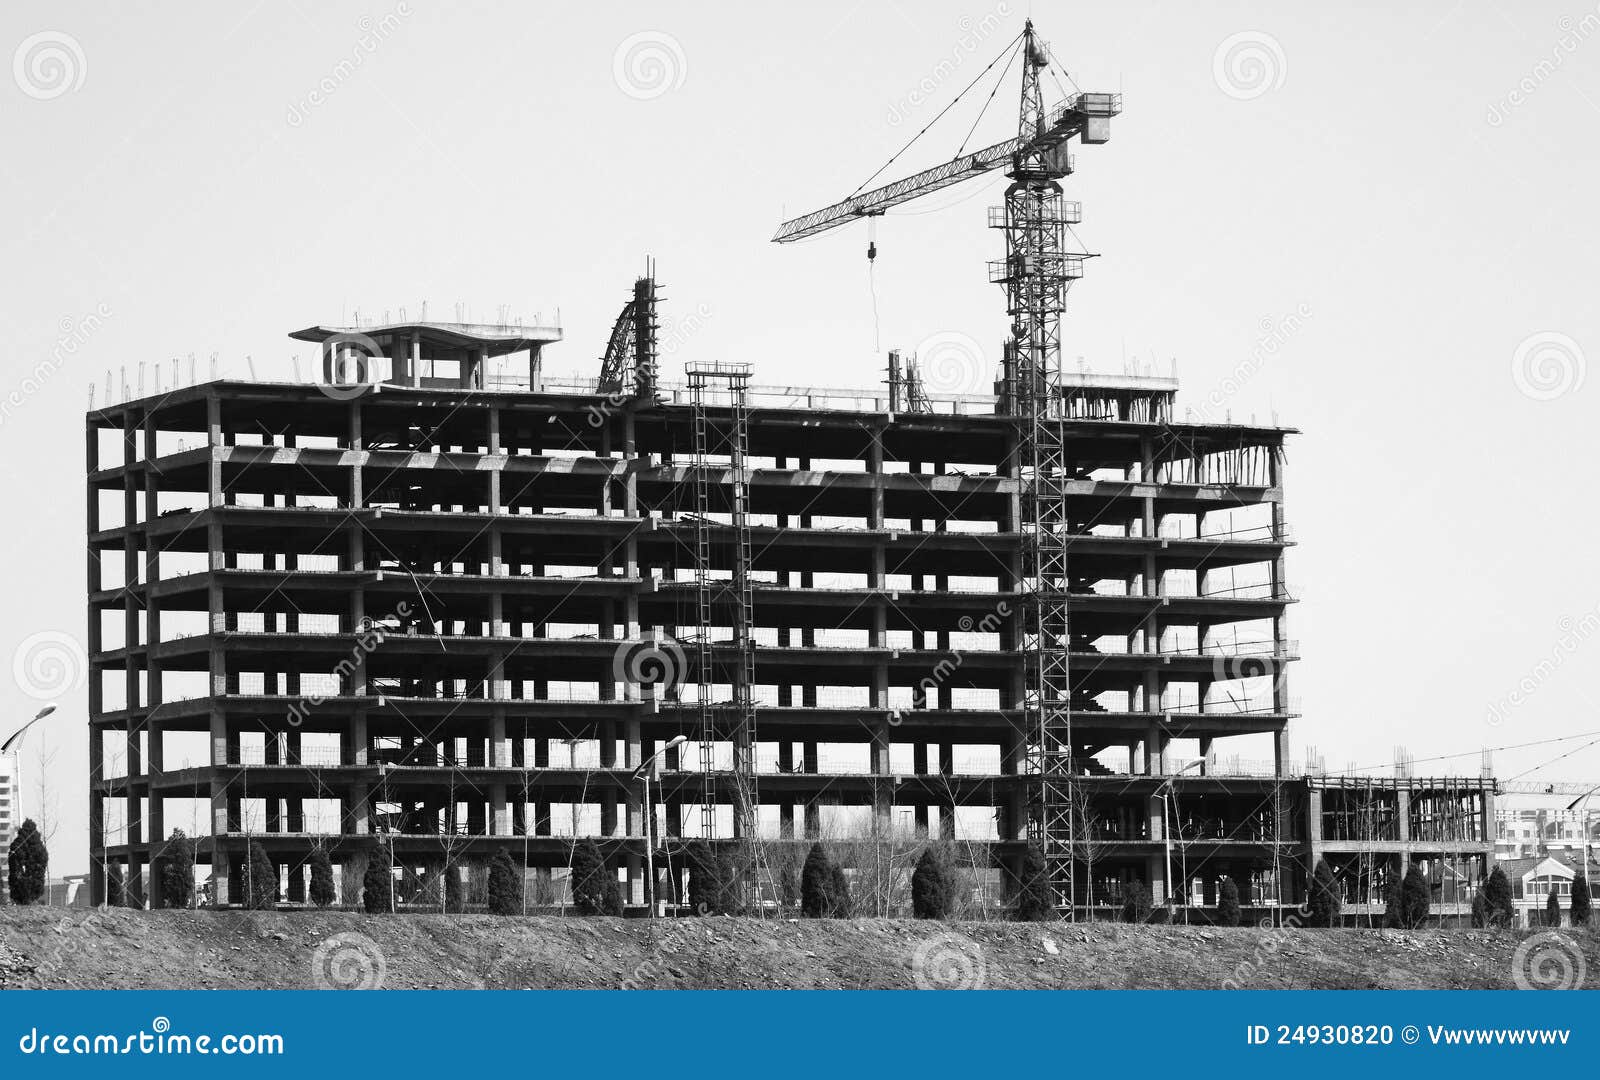 The Skeleton Of A Building Stock Photo - Image: 24930820